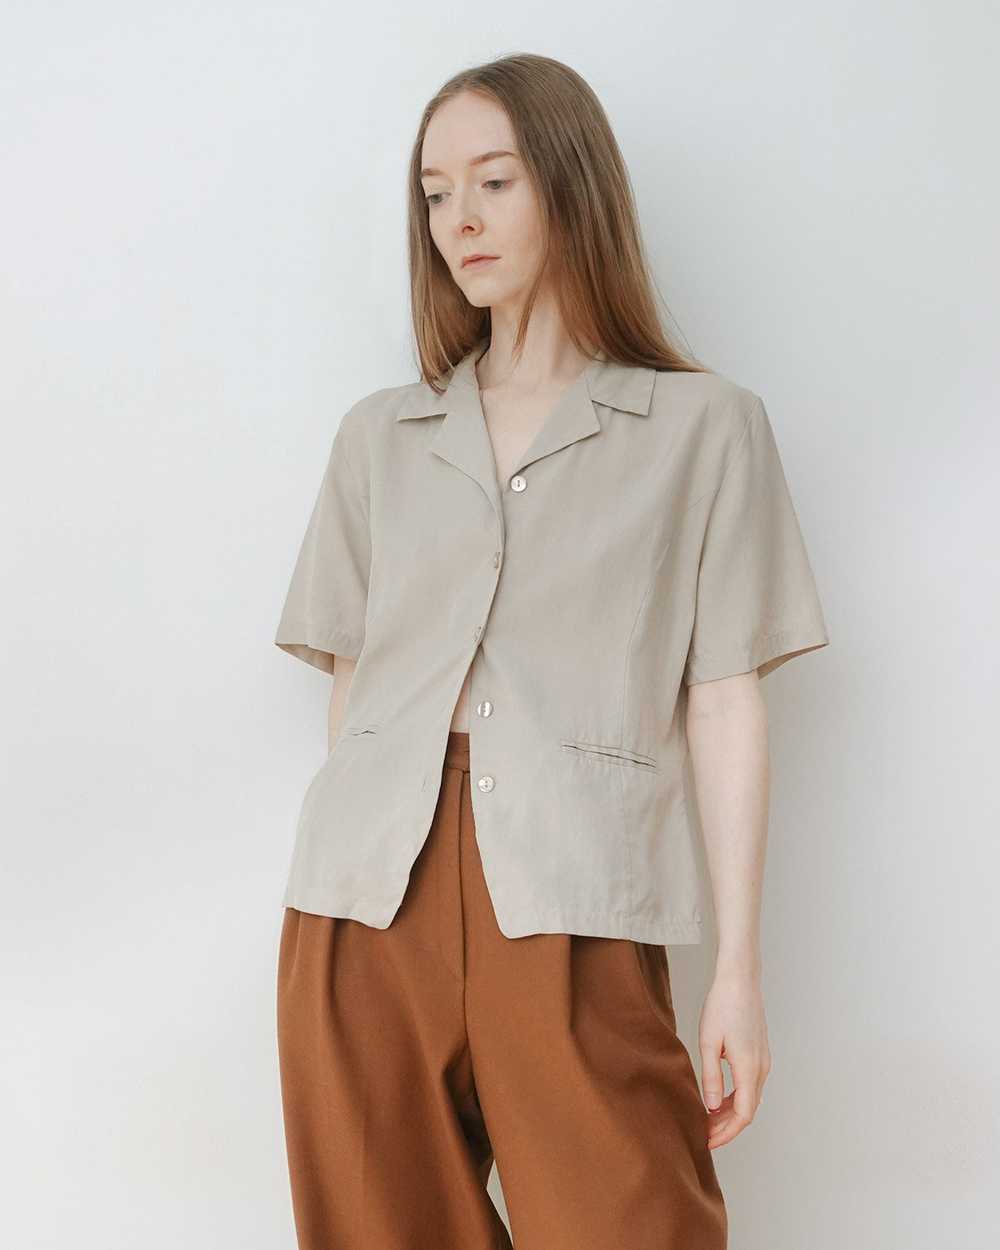 Beige Silk Button Up Blouse with Back Tie - image 1